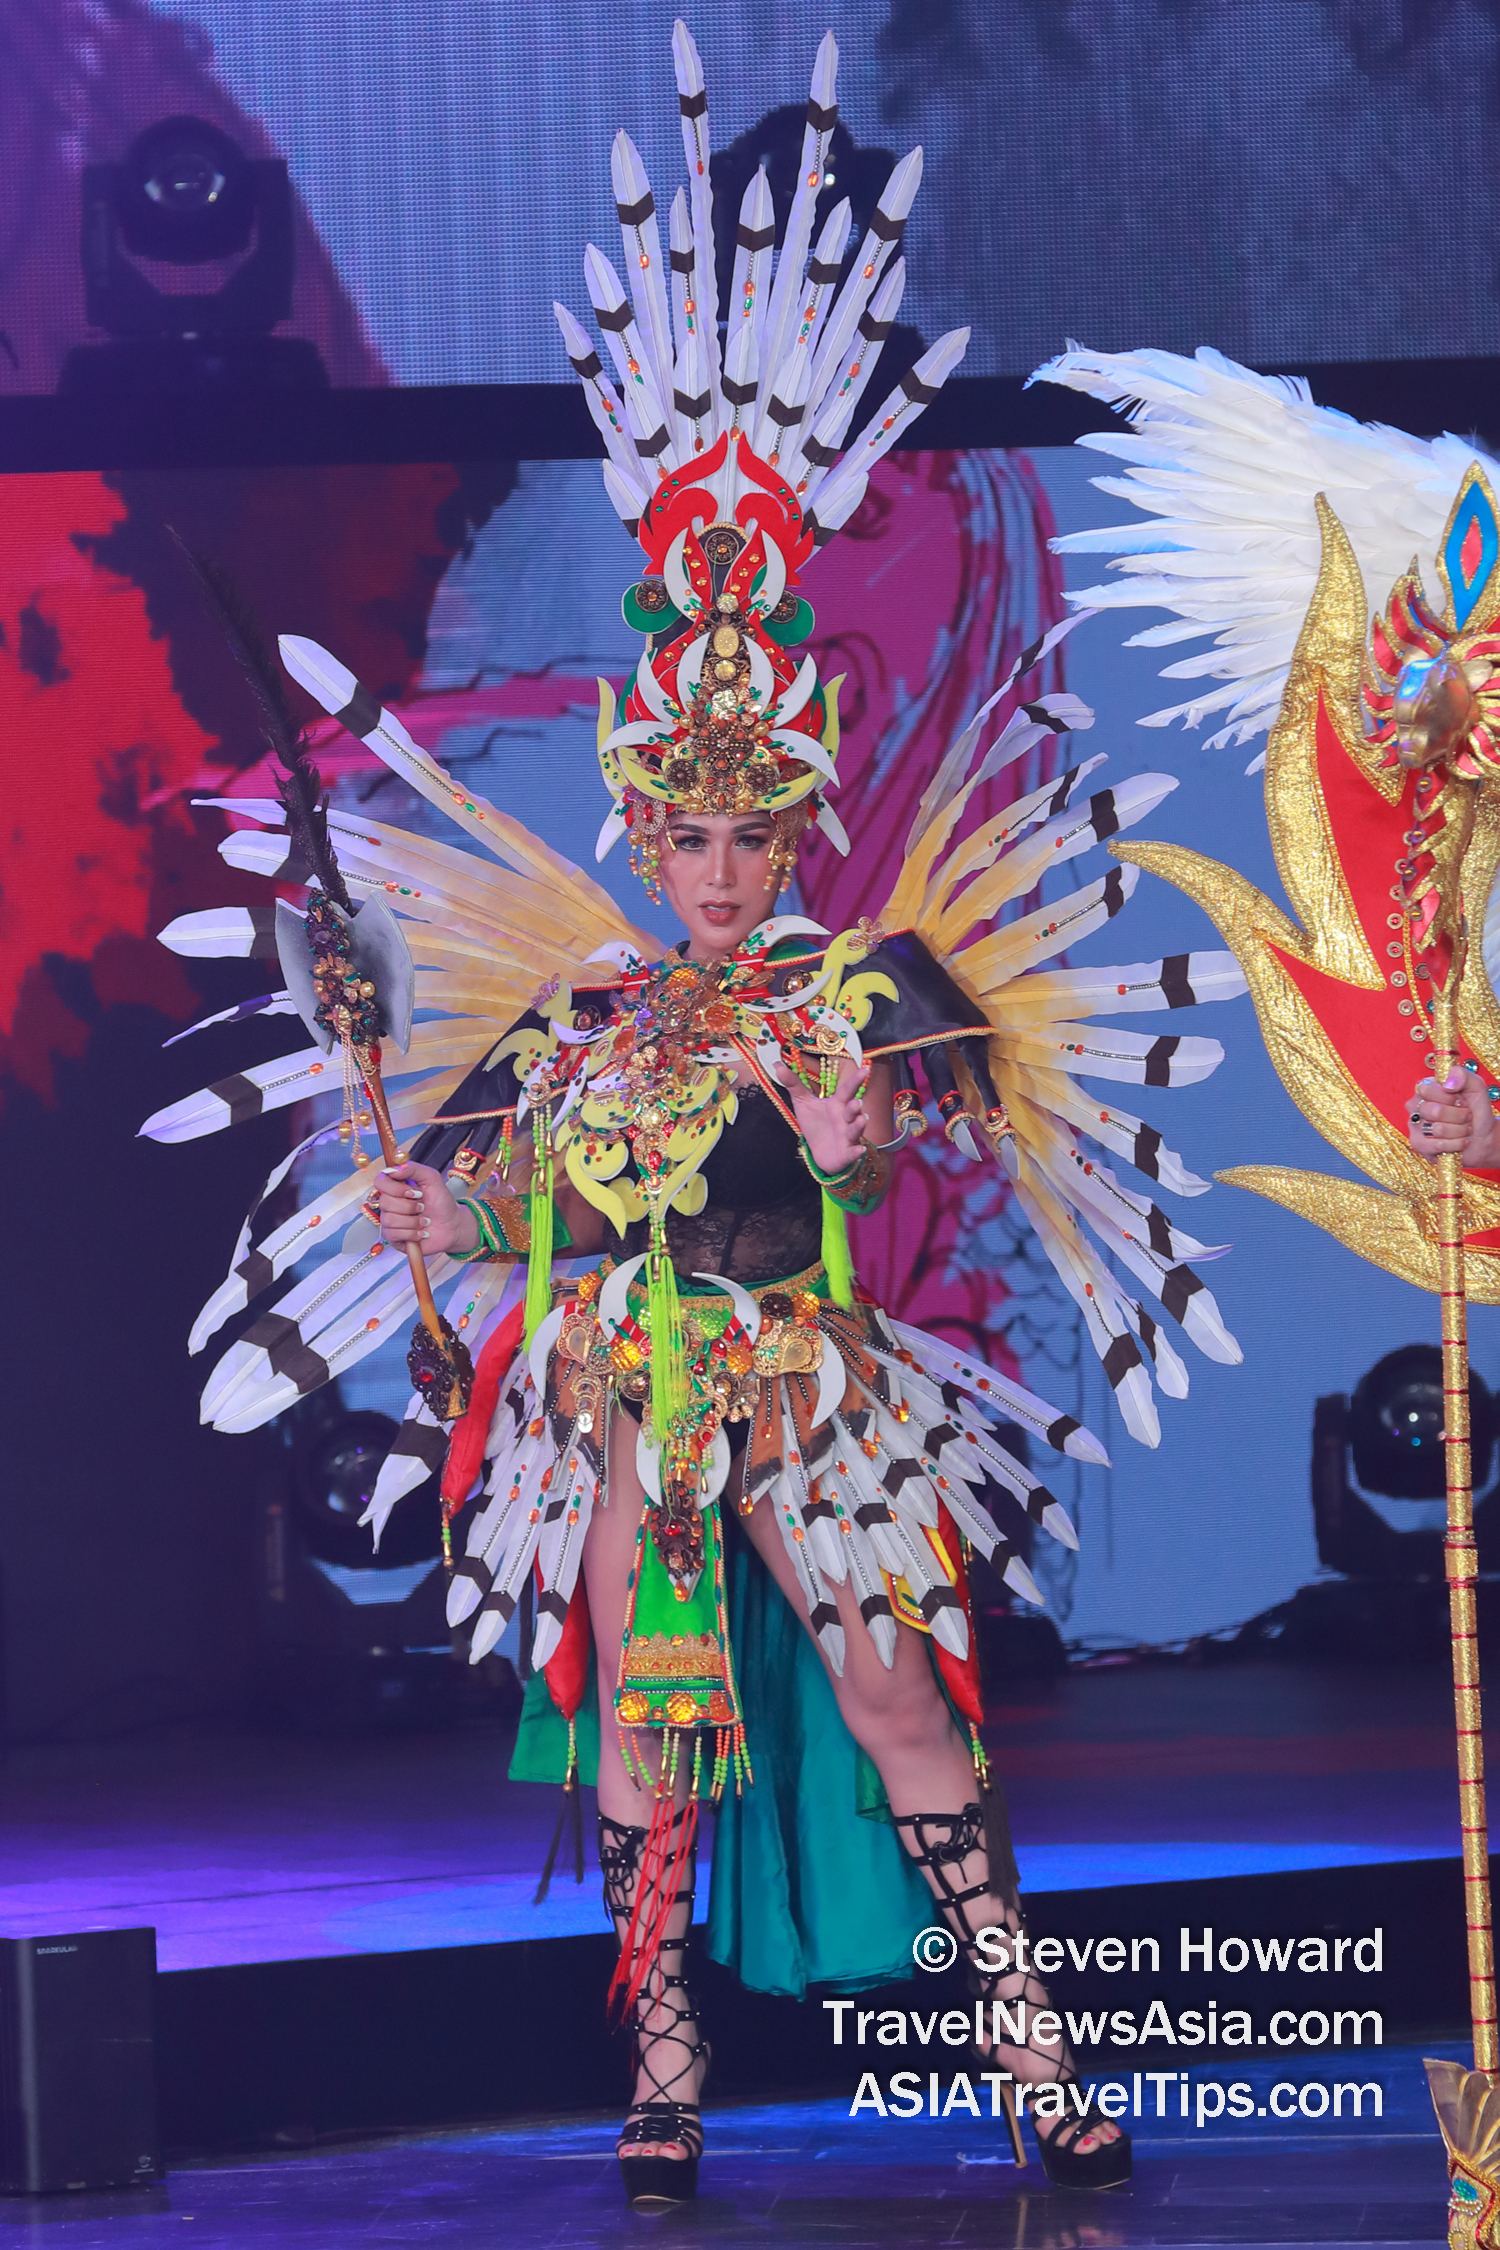 Pictures from Miss International Queen 2020 Transgender Beauty Pageant in Pattaya, Thailand. Pictures by Steven Howard of TravelNewsAsia.com